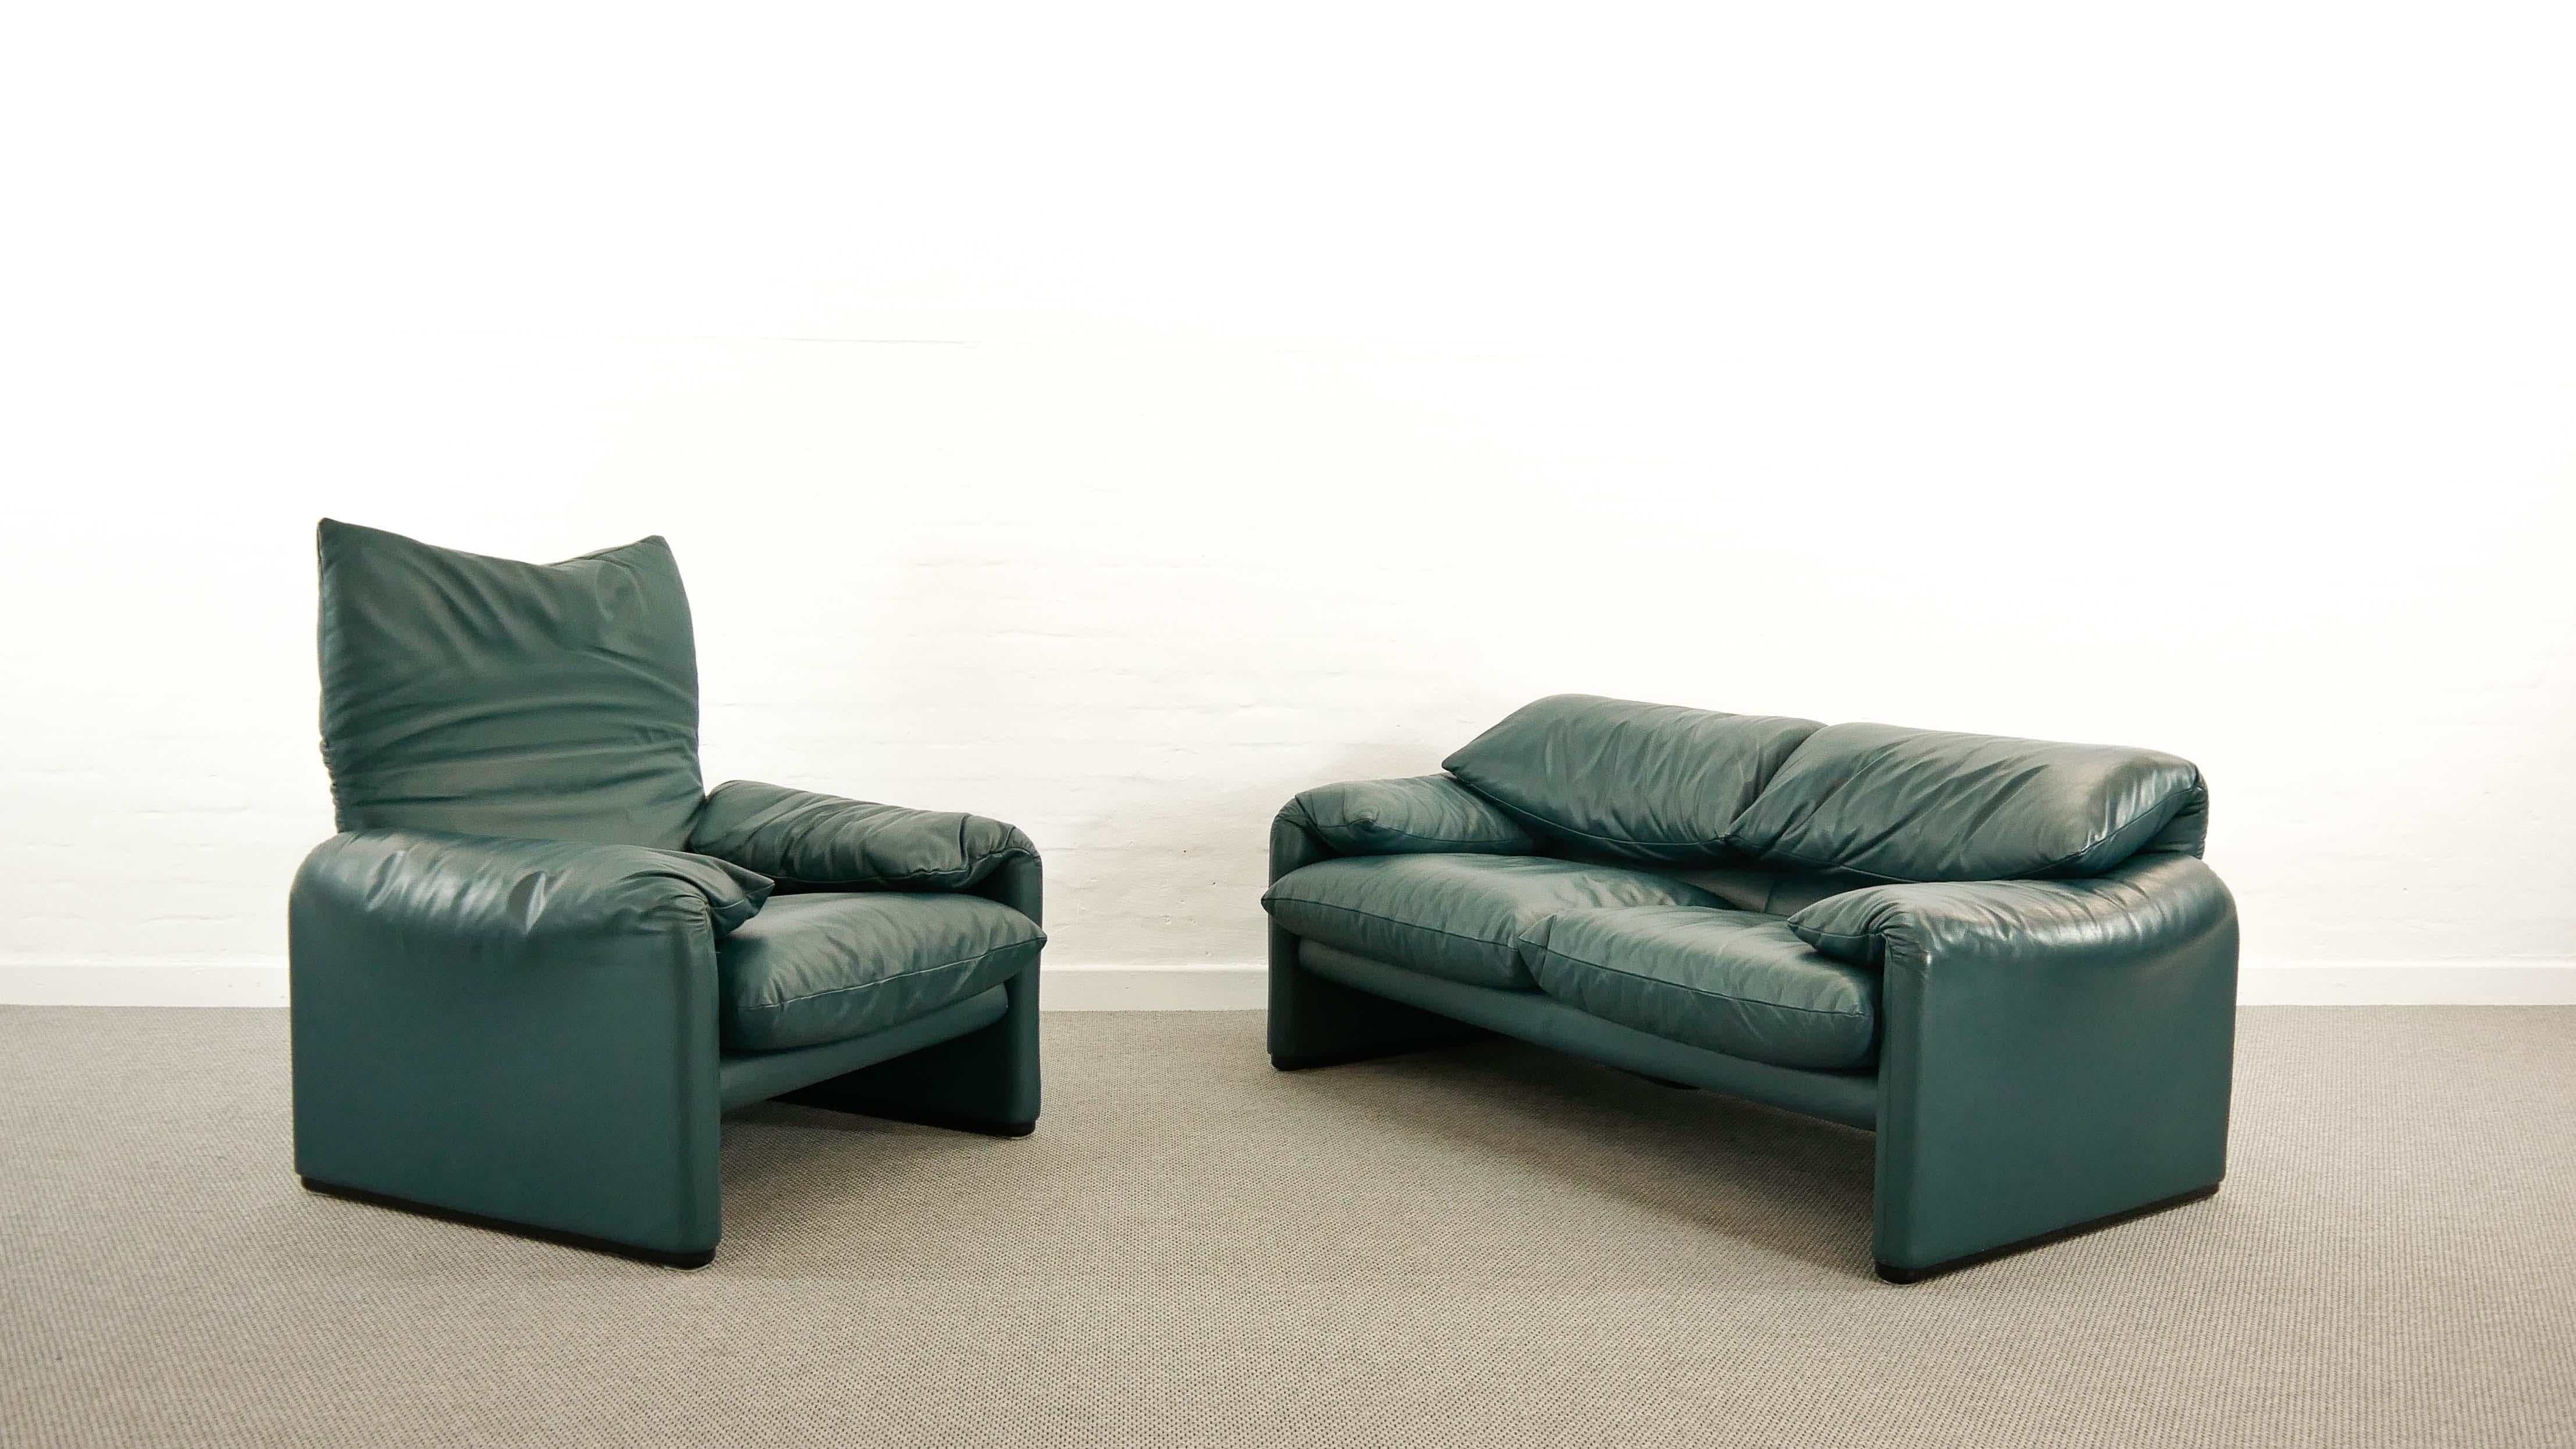 Set of Maralunga 2-seat sofa and easy chair by Cassina, designed in 1973. This offer features one 2- seat sofa and one easy chair together. Fabric and color is identical, because both sofas came from the same source. Original upholstery in dark